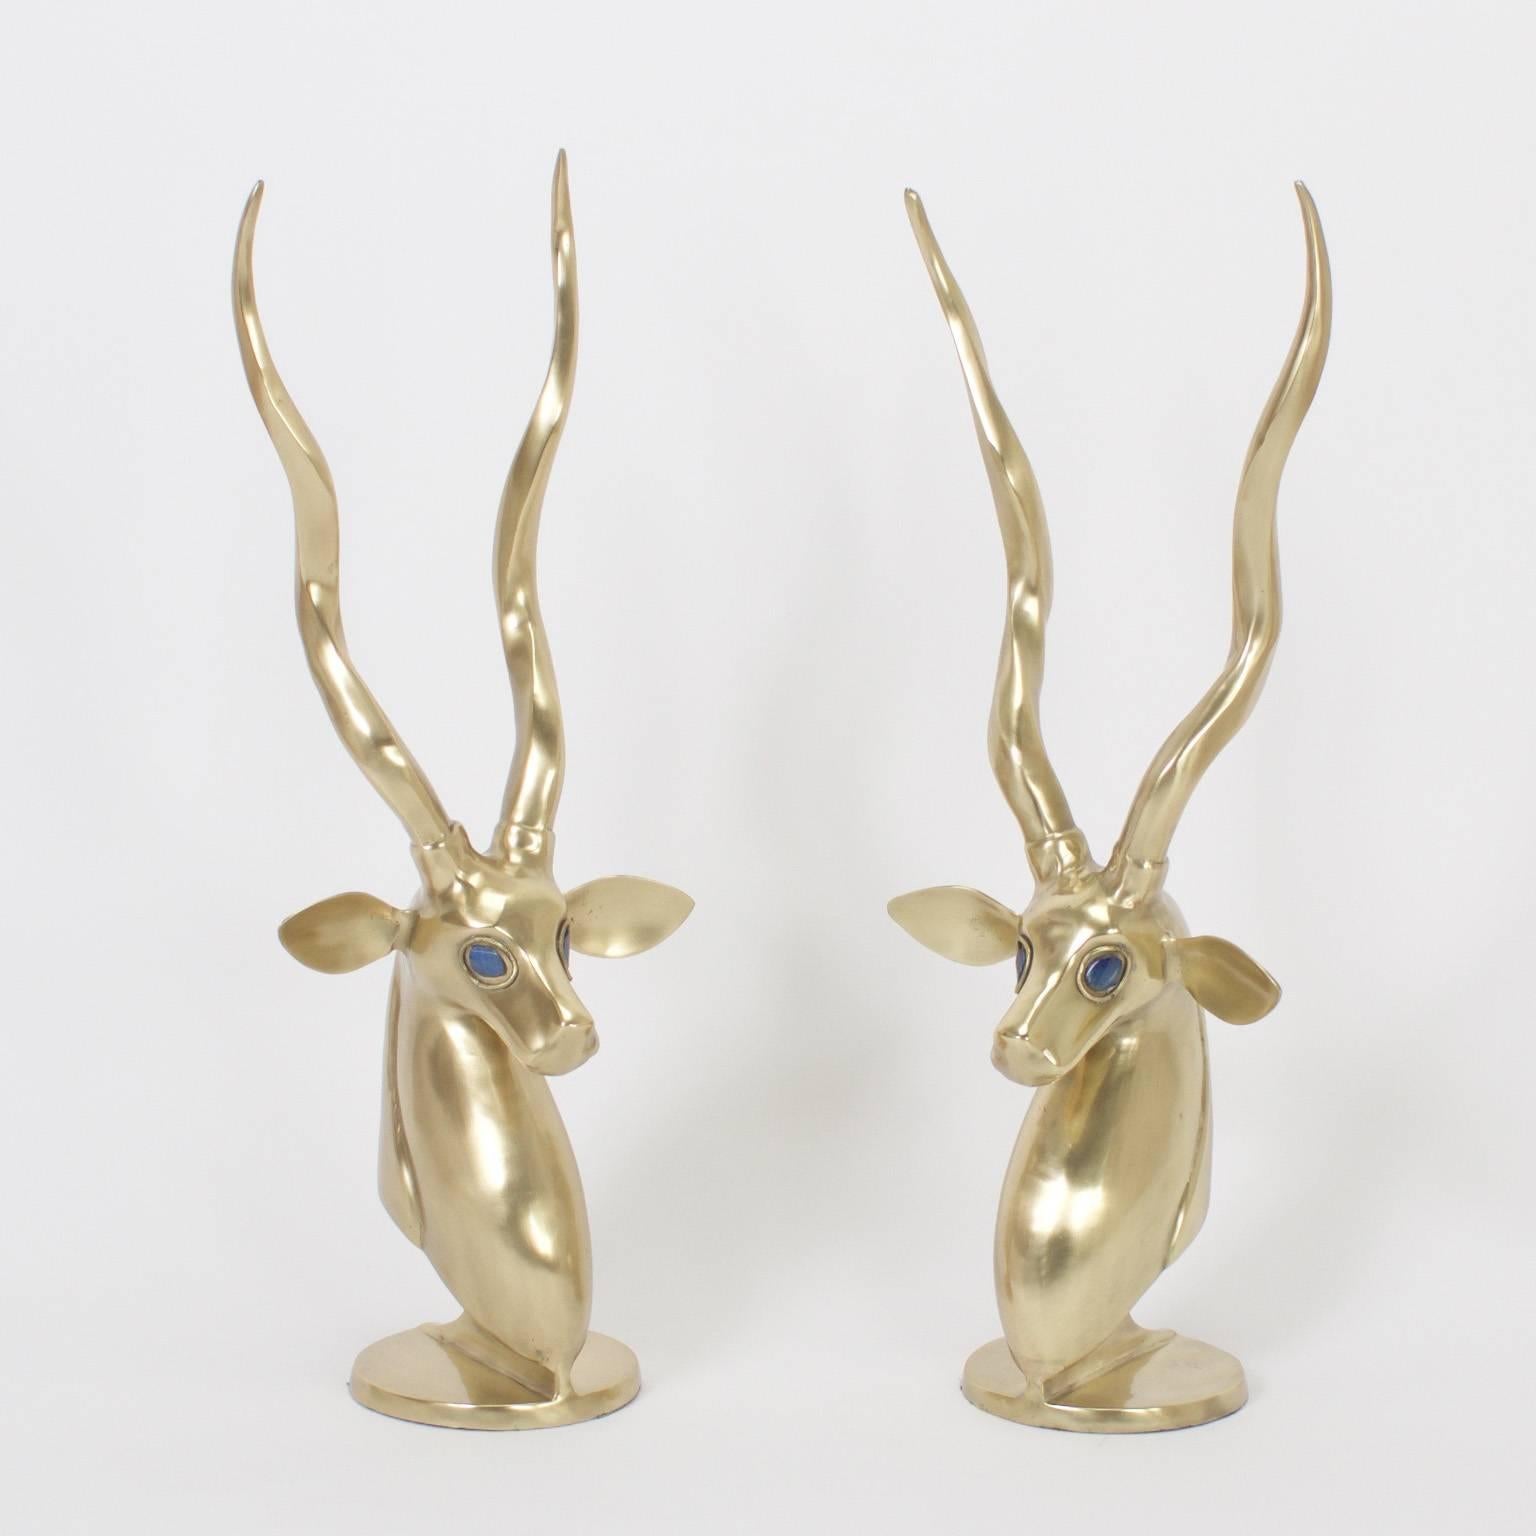 Striking pair of Mid-Century stylized brass gazelles with a strong, simplified approach. Set off with semi-precious blue stone eyes and presented on round sculptural bases. Executed in the style of Anthony Redmile.

.